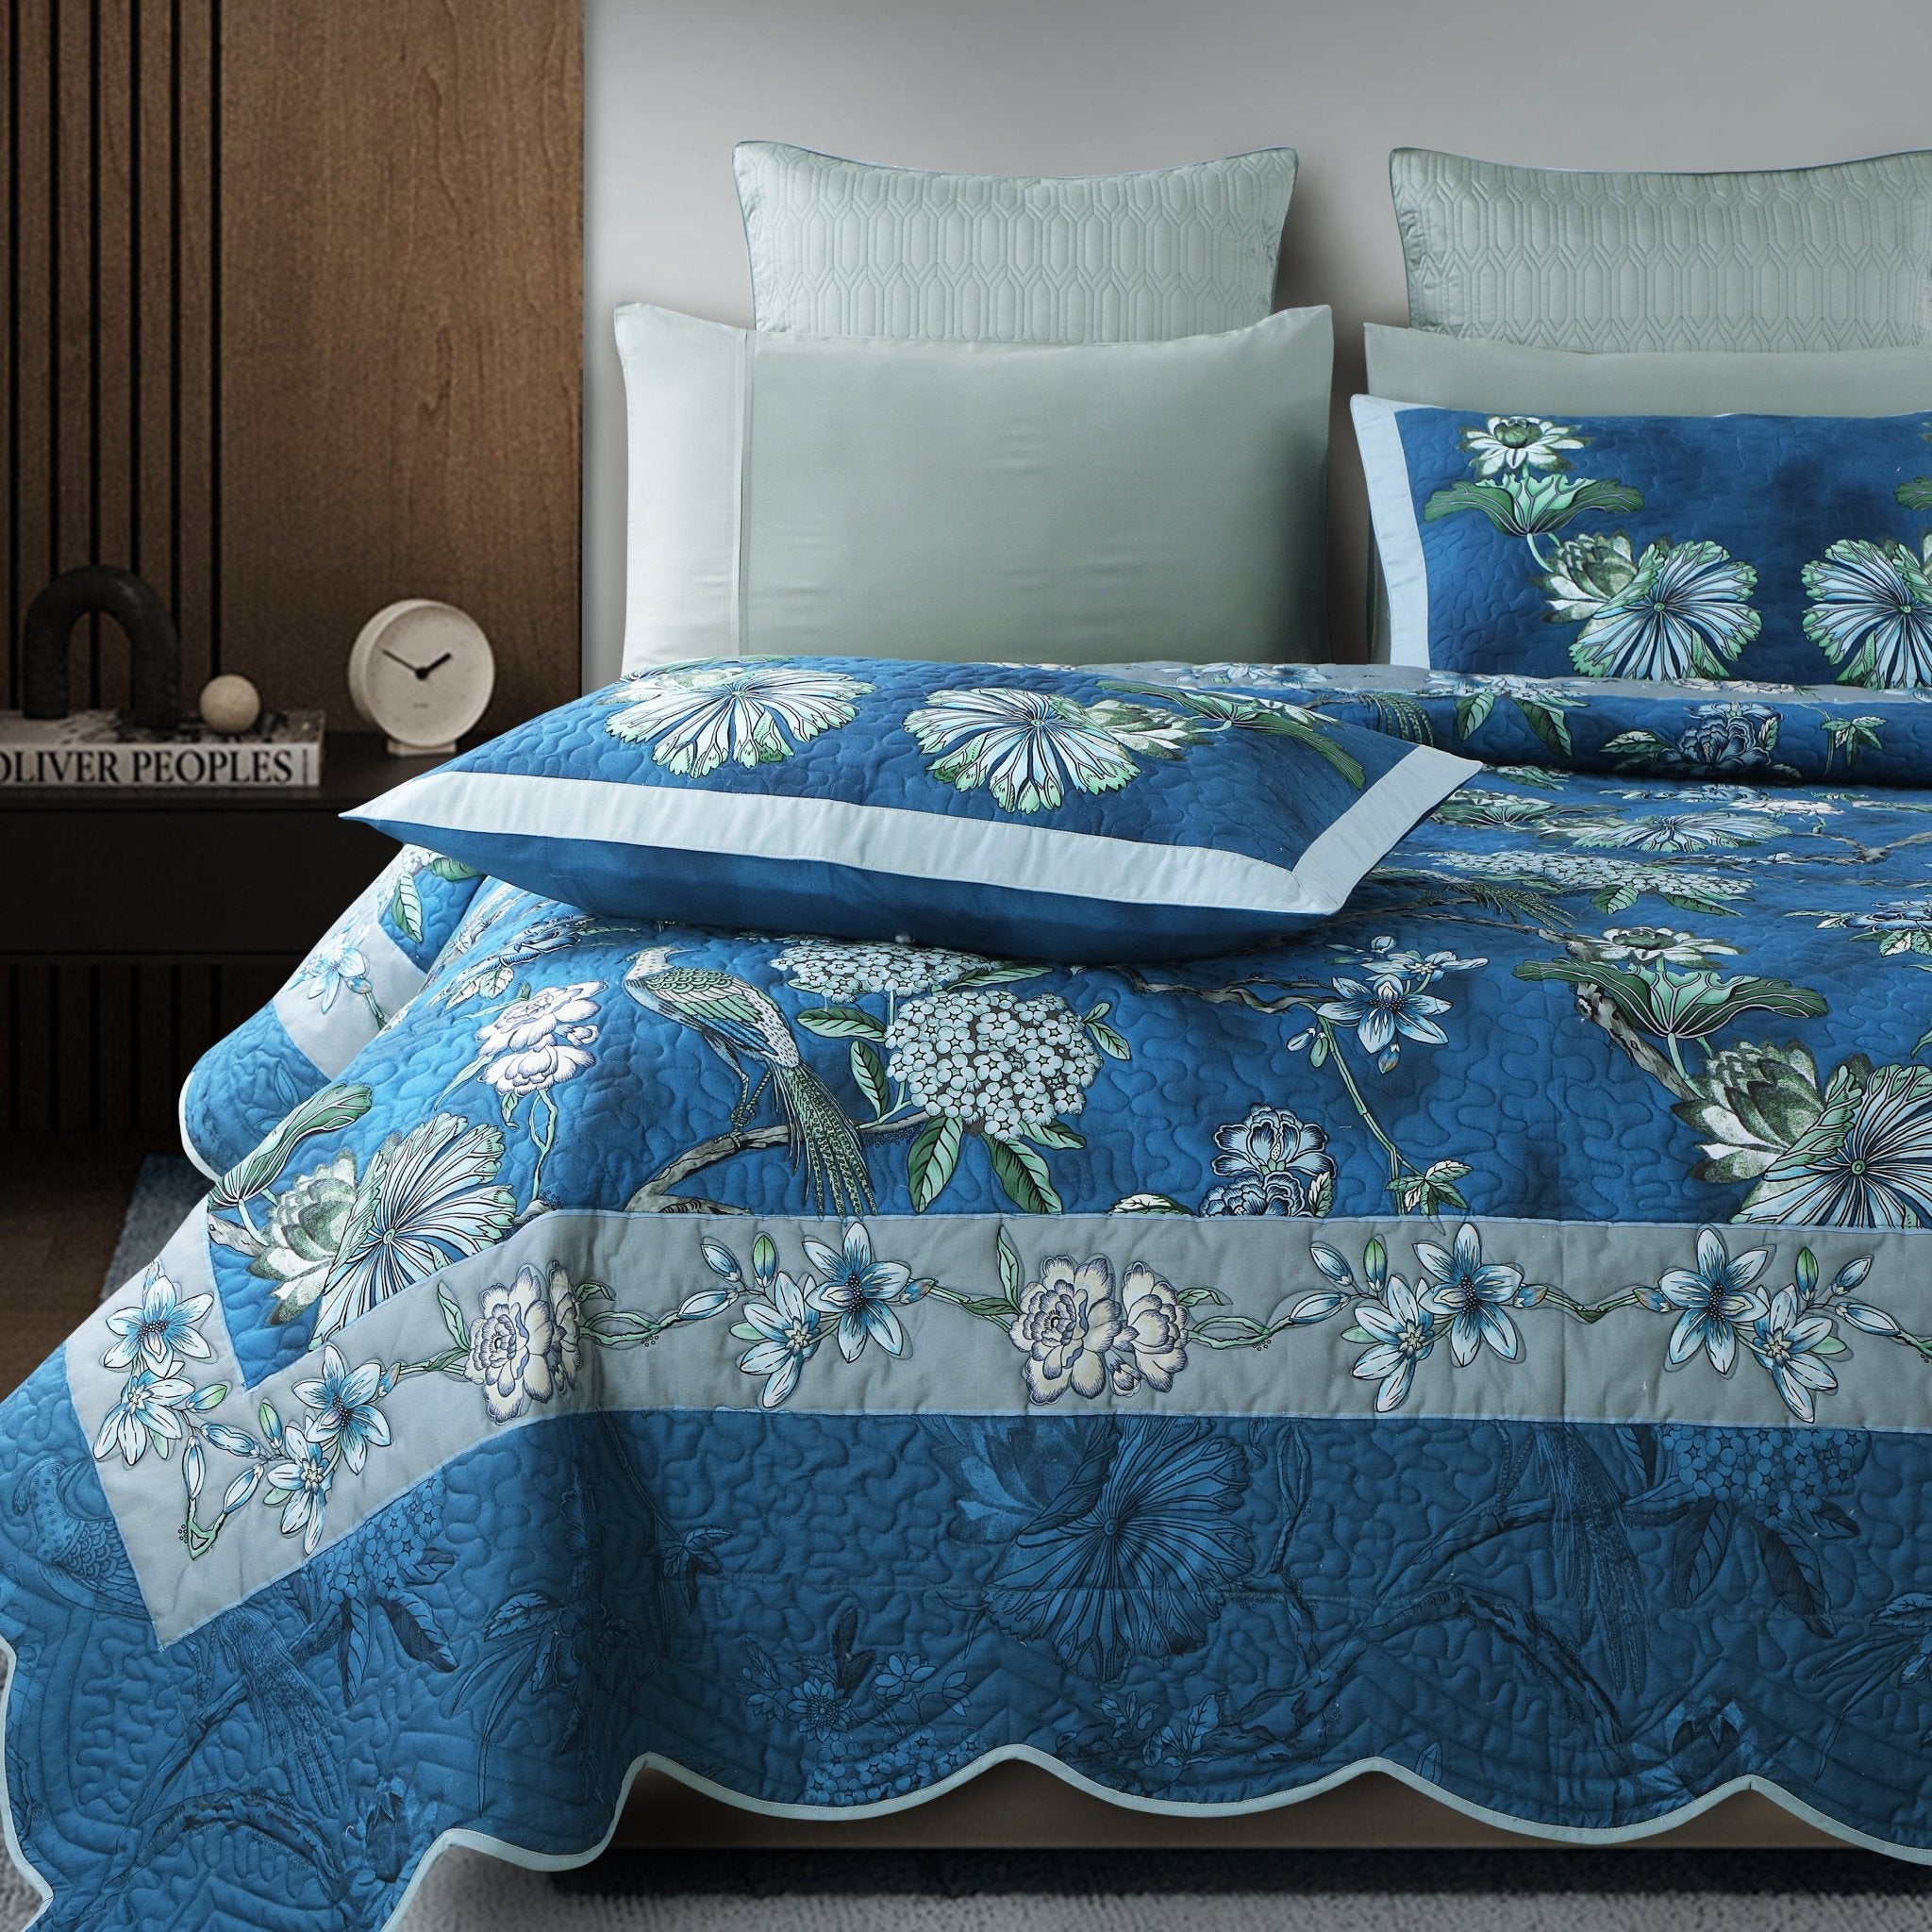 Malako Fleur Botanique Blue King Size 100% Cotton Quilted Bed Cover Set - MALAKO